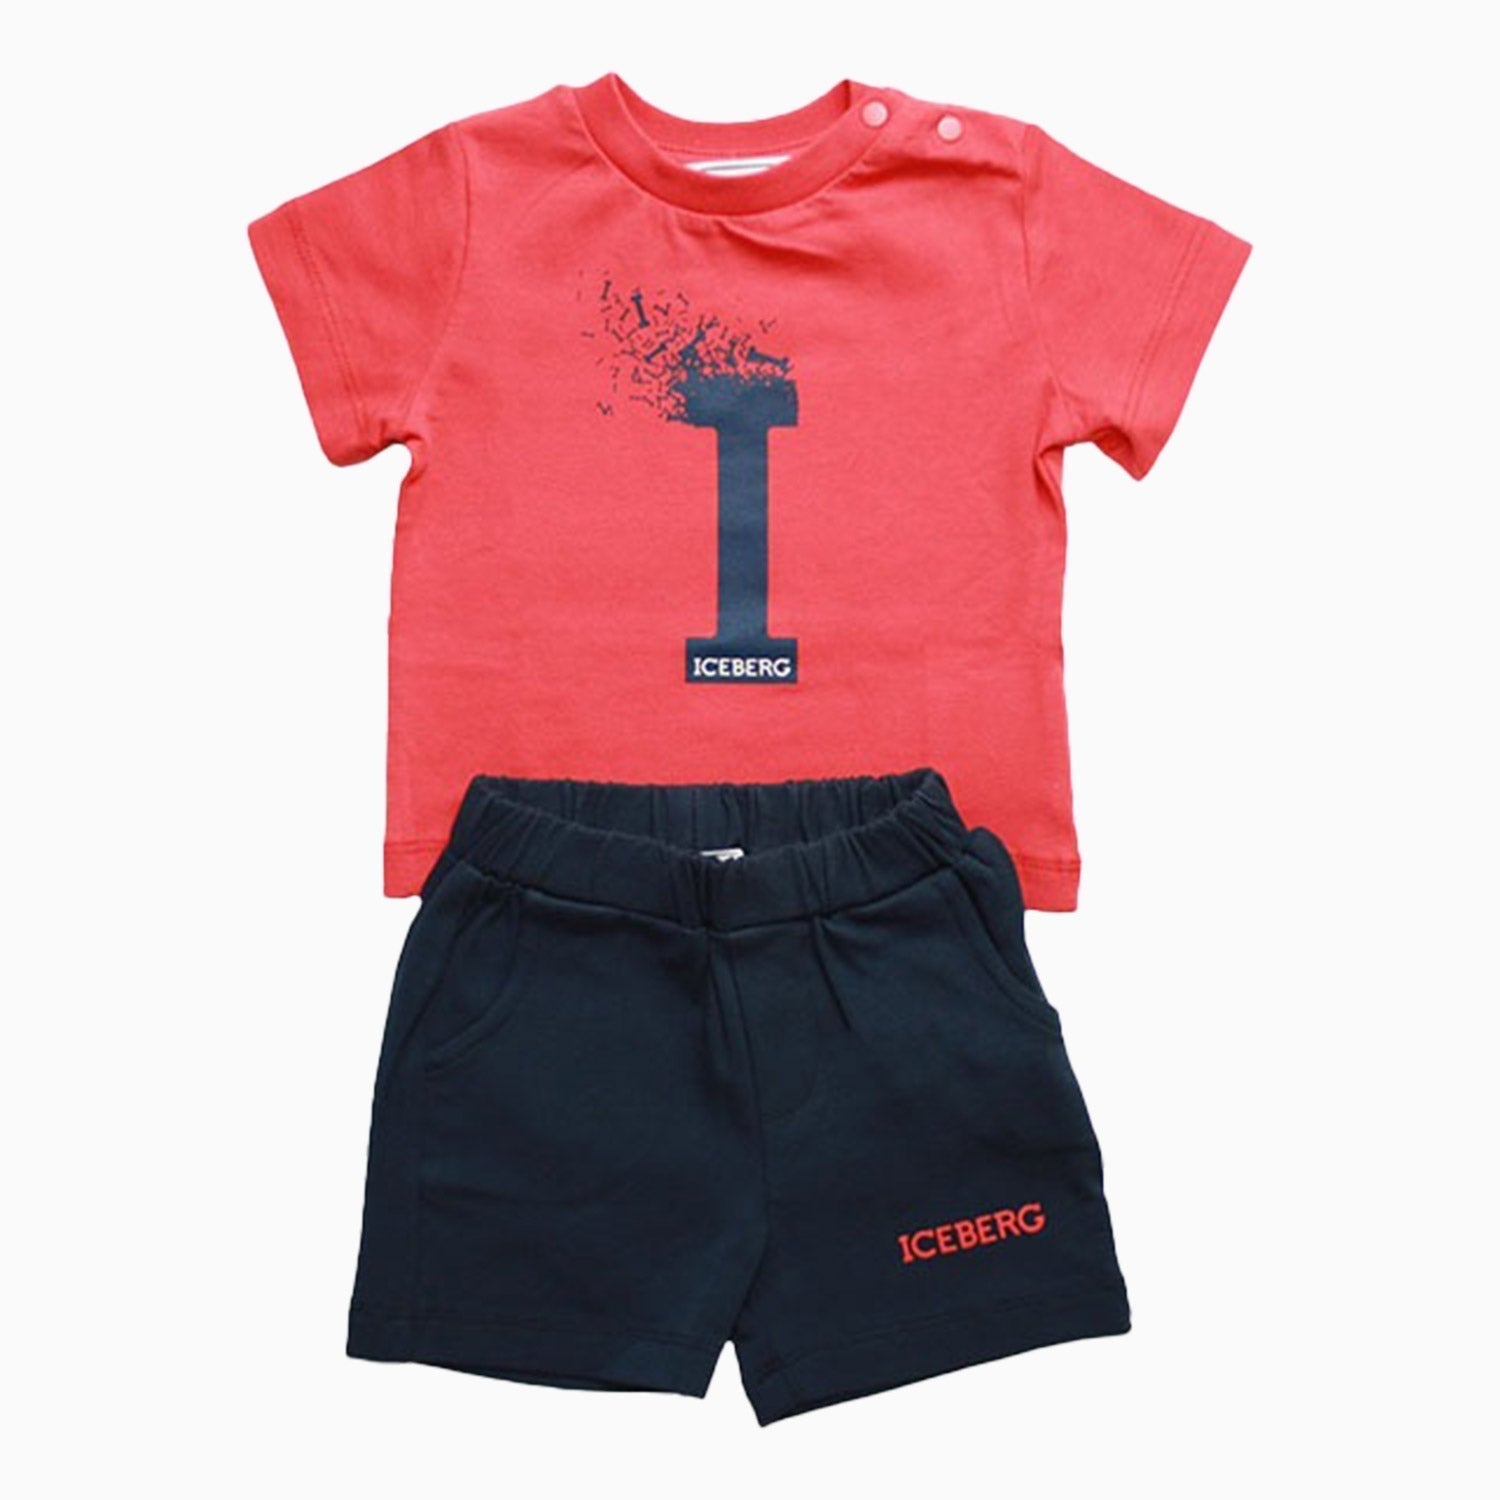 Iceberg Kid's Completo In Jersey Outfit Infants - Color: Rosso - Kids Premium Clothing -